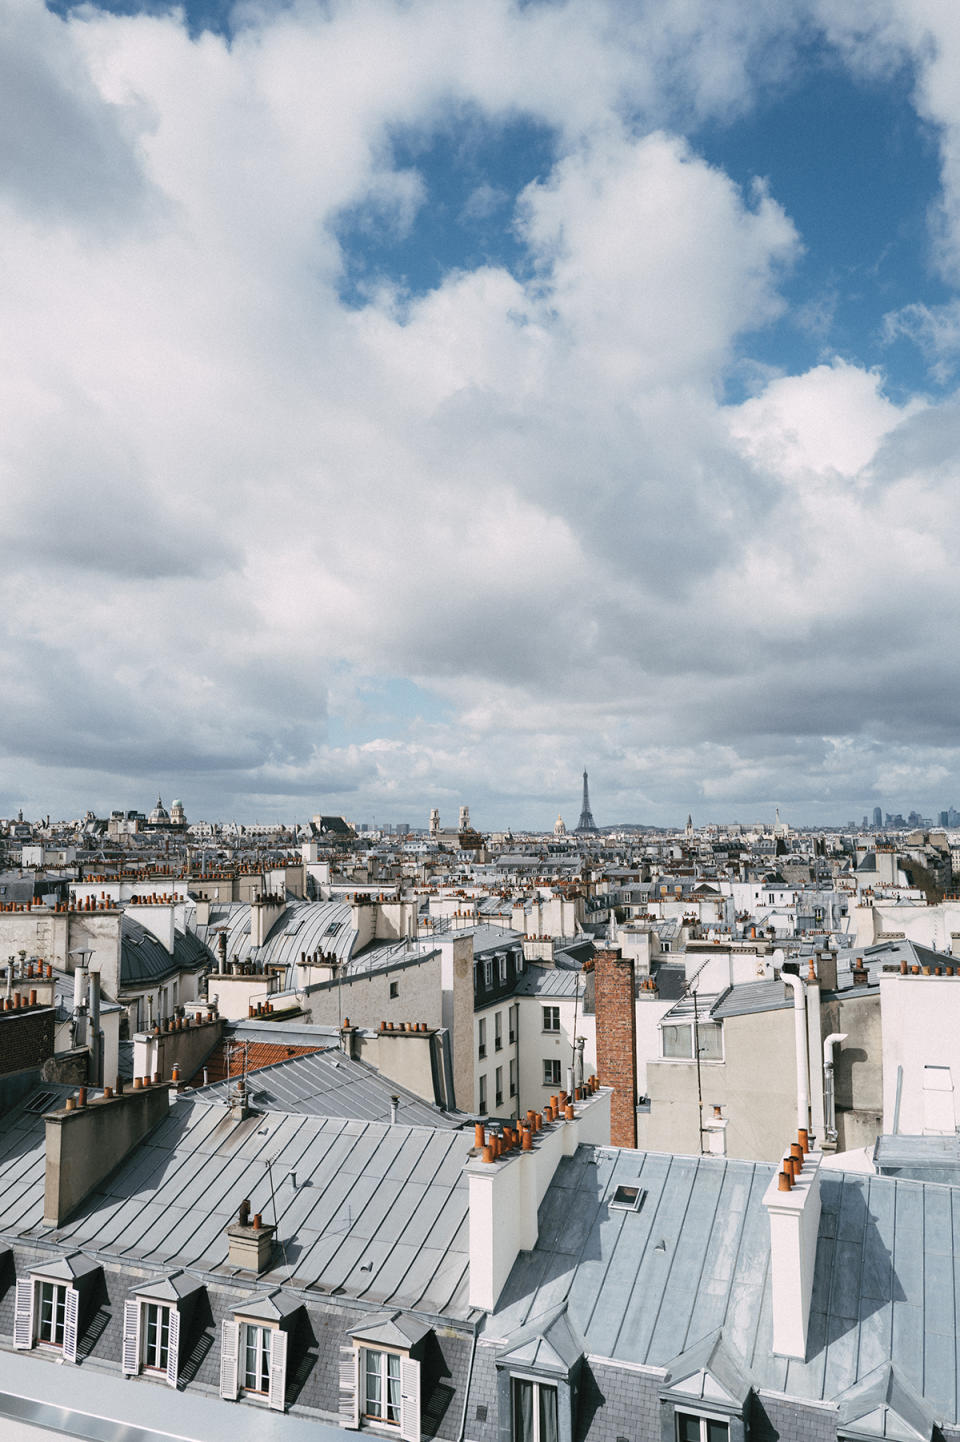 A view over the rooftops to the Eiffel Tower.